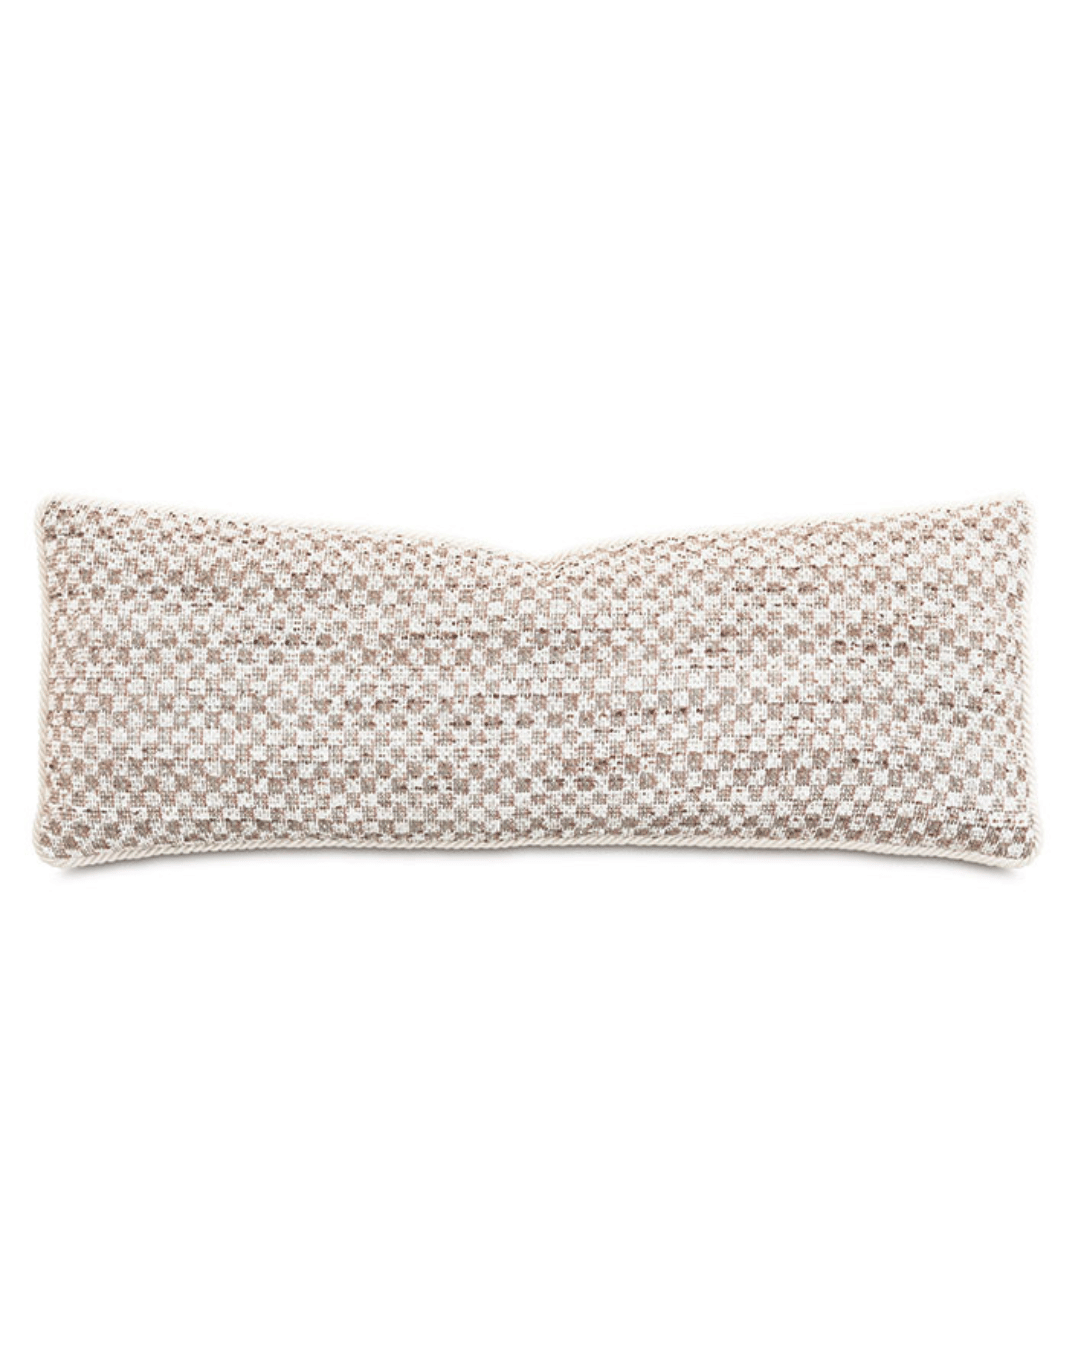 A rectangular lumbar pillow from Eastern Accents with a textured beige and white diamond pattern design, reminiscent of a Scottsdale Arizona bungalow, isolated on a white background.